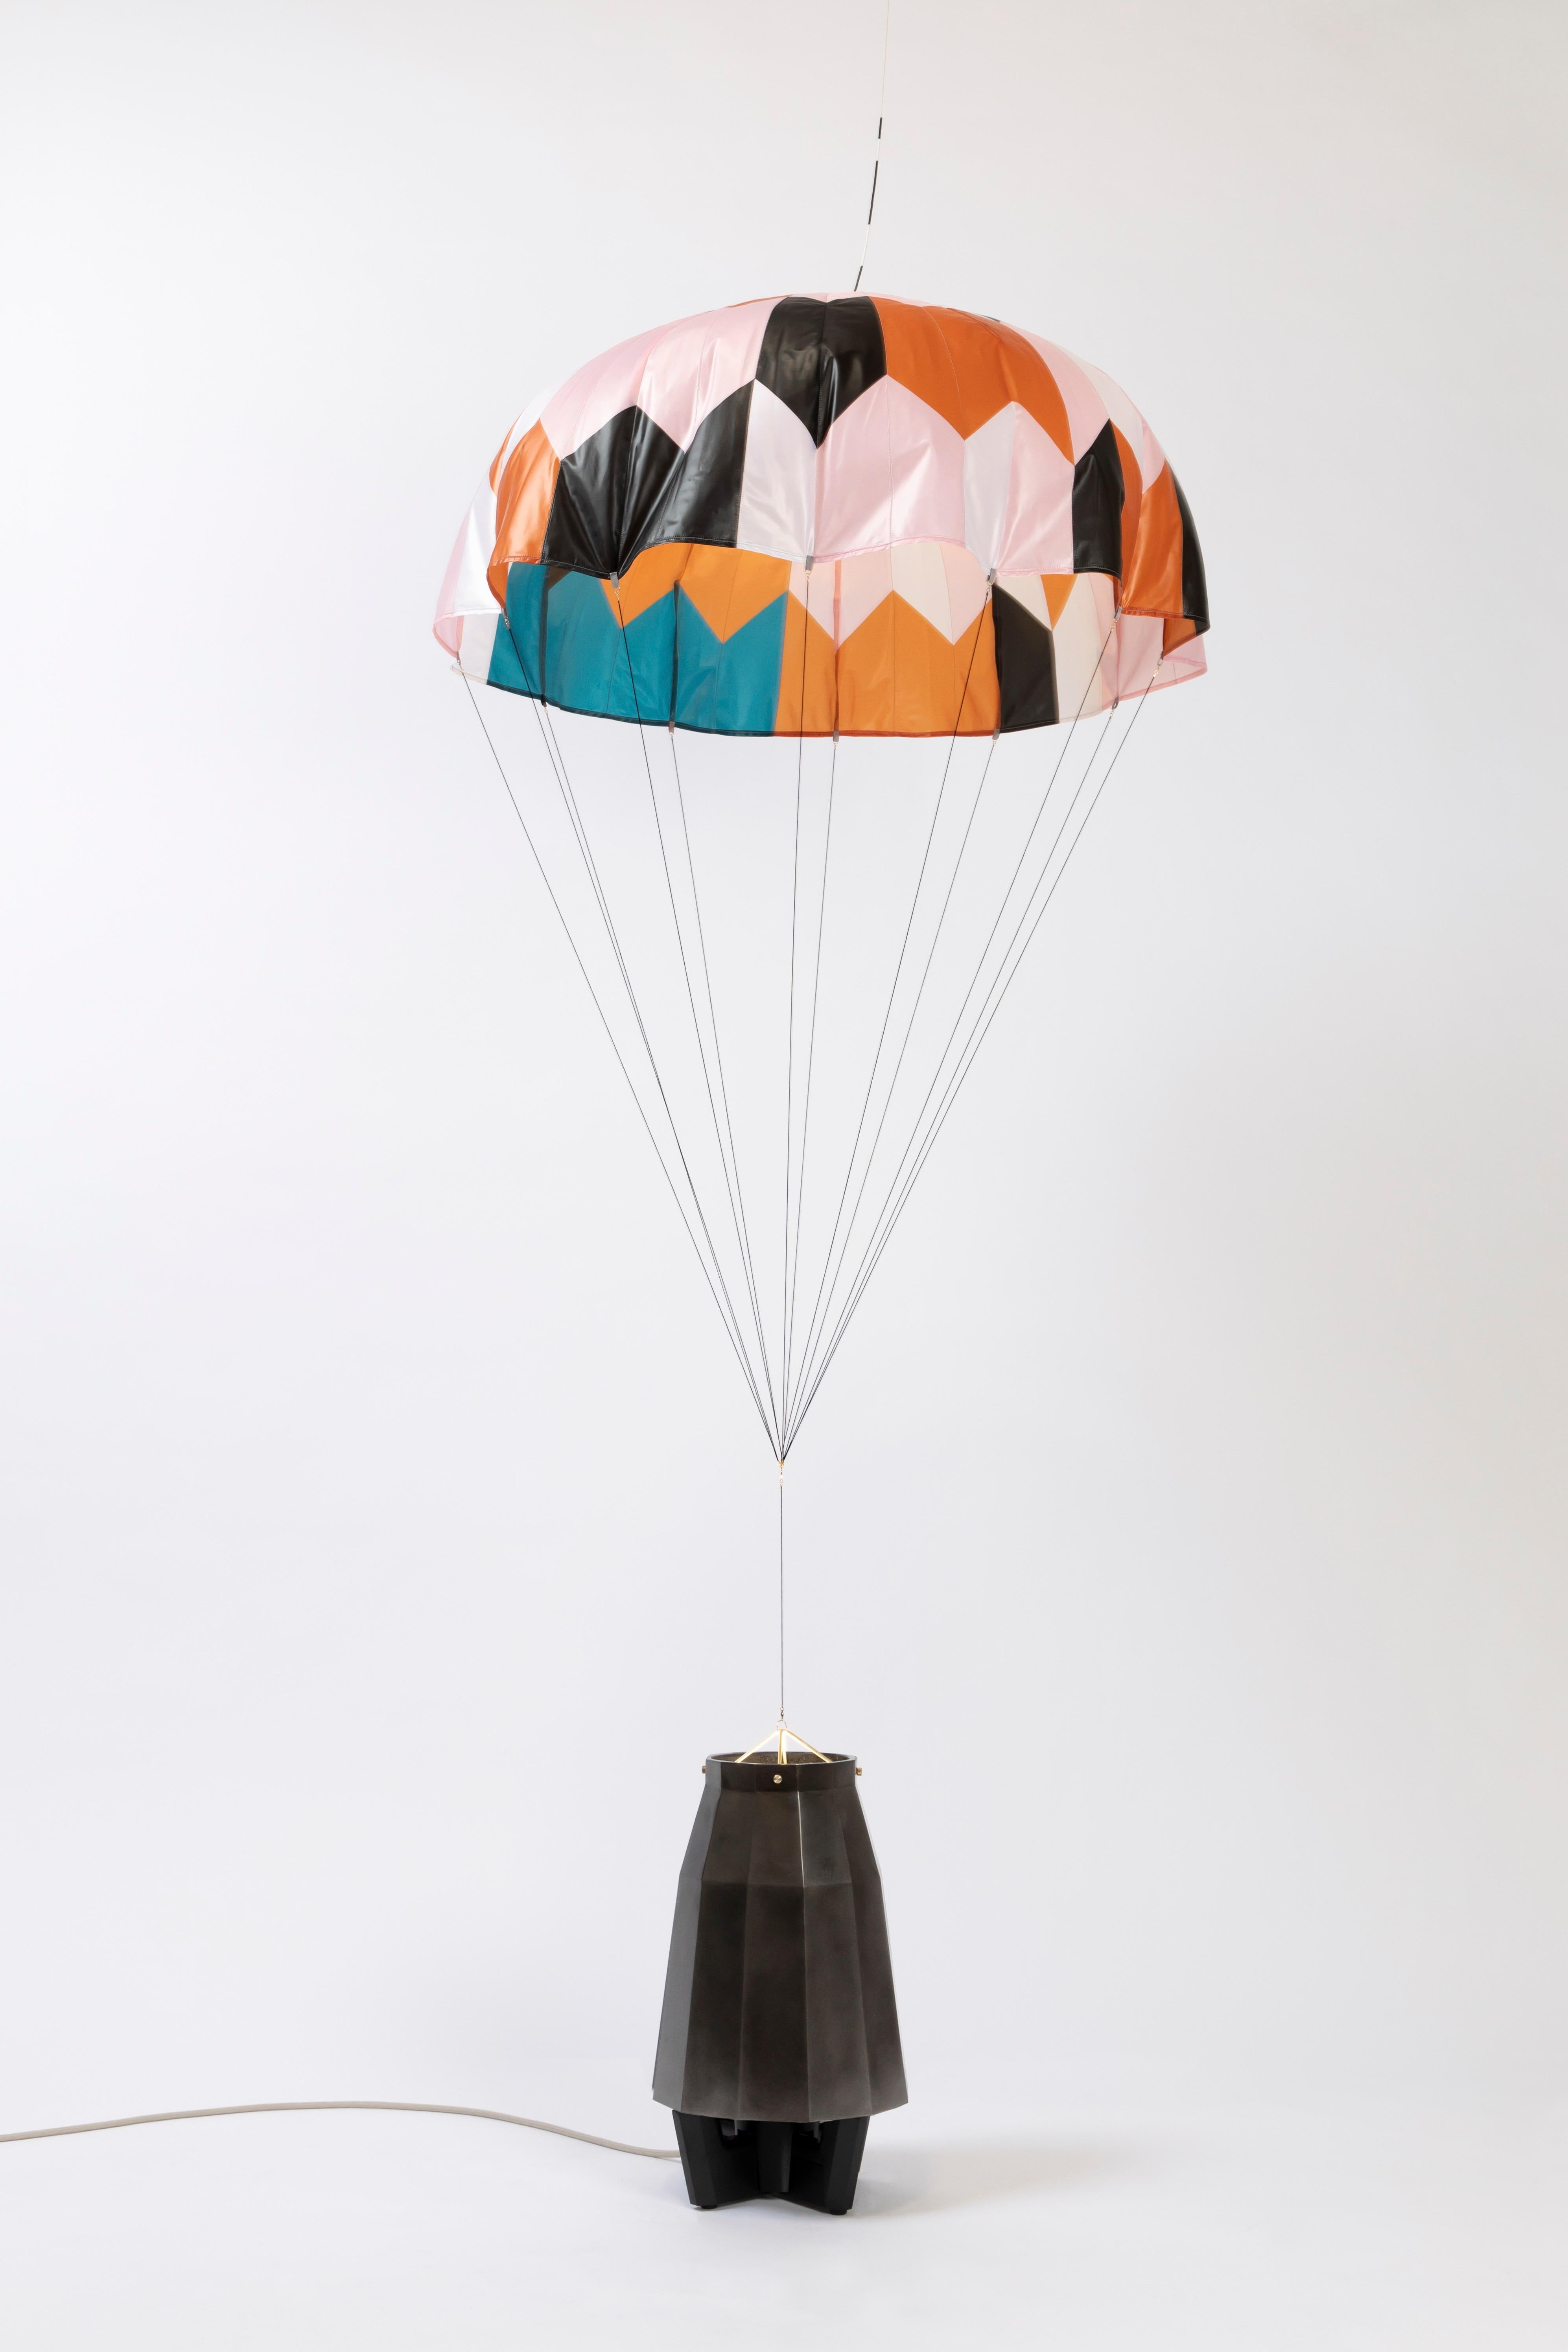 Unique and dynamic parachute lamp with a lacquered black aluminum base. A clever and engaging piece that enhances any space.

Additional Information:
From acclaimed lighting designer Bec Brittain, a new series of dynamic, whimsical lighting forms